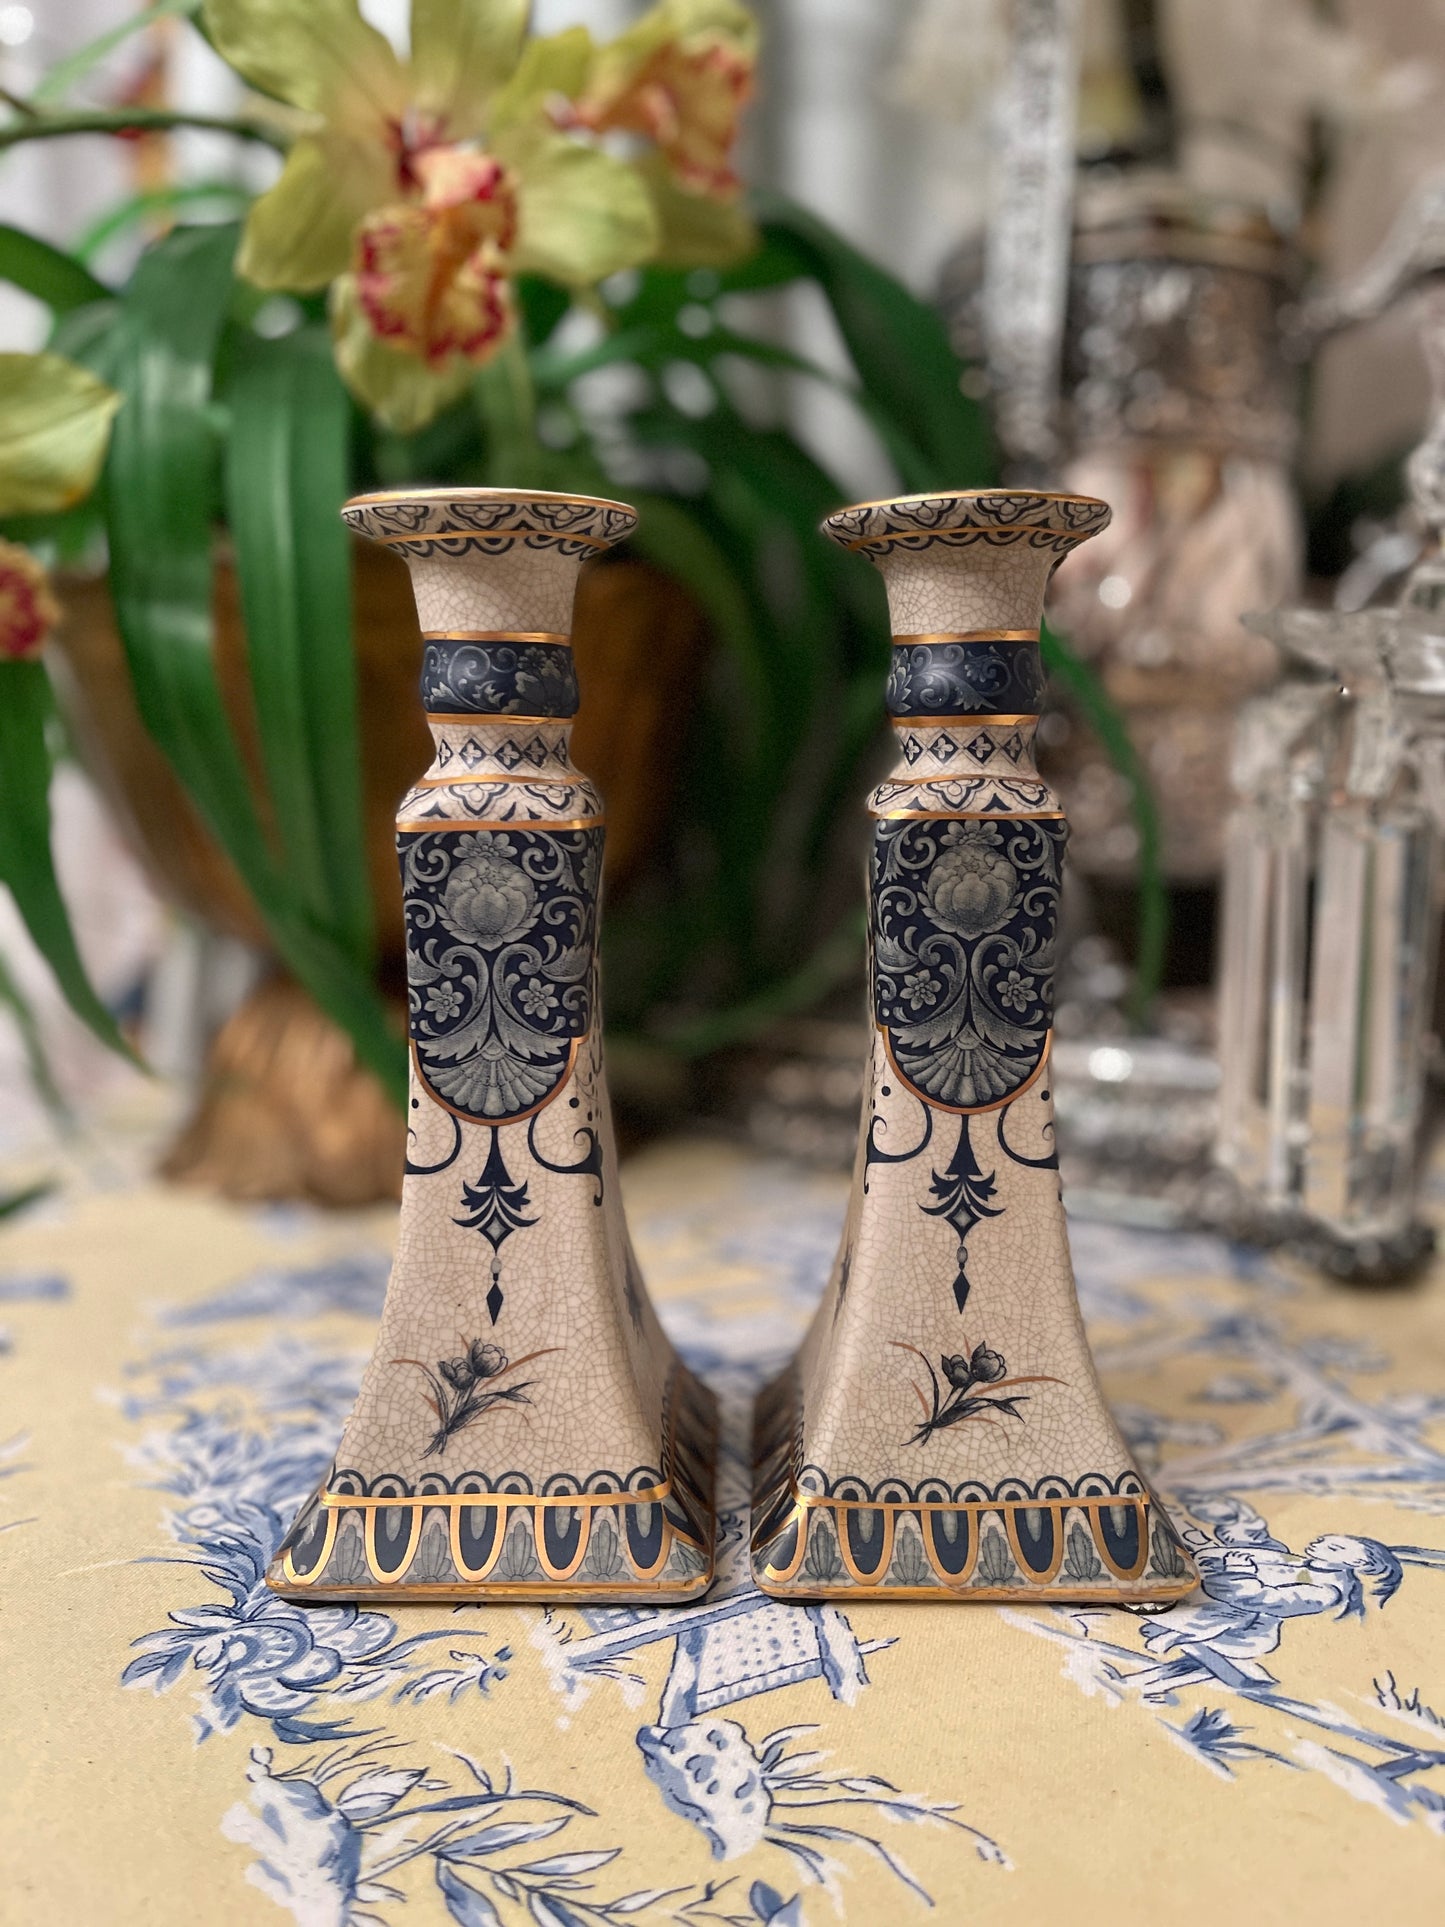 Vintage candlesticks with varying shades of blue and gold on an intentionally crazed finish, Beautifully detailed